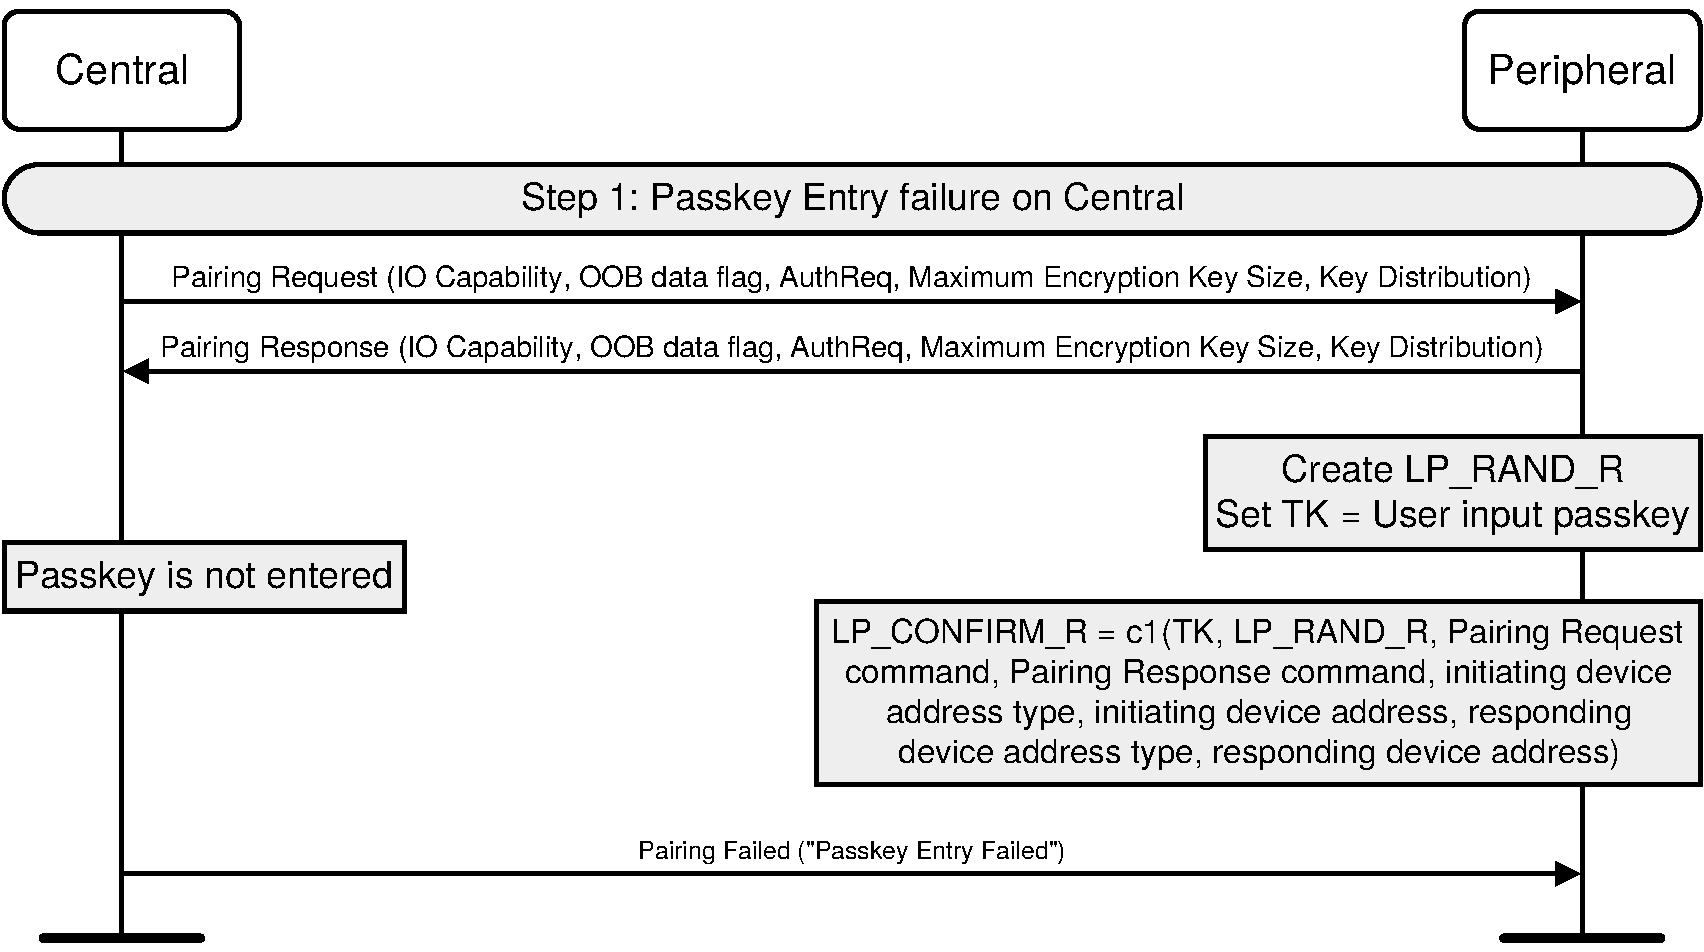 Passkey Entry failure on Central